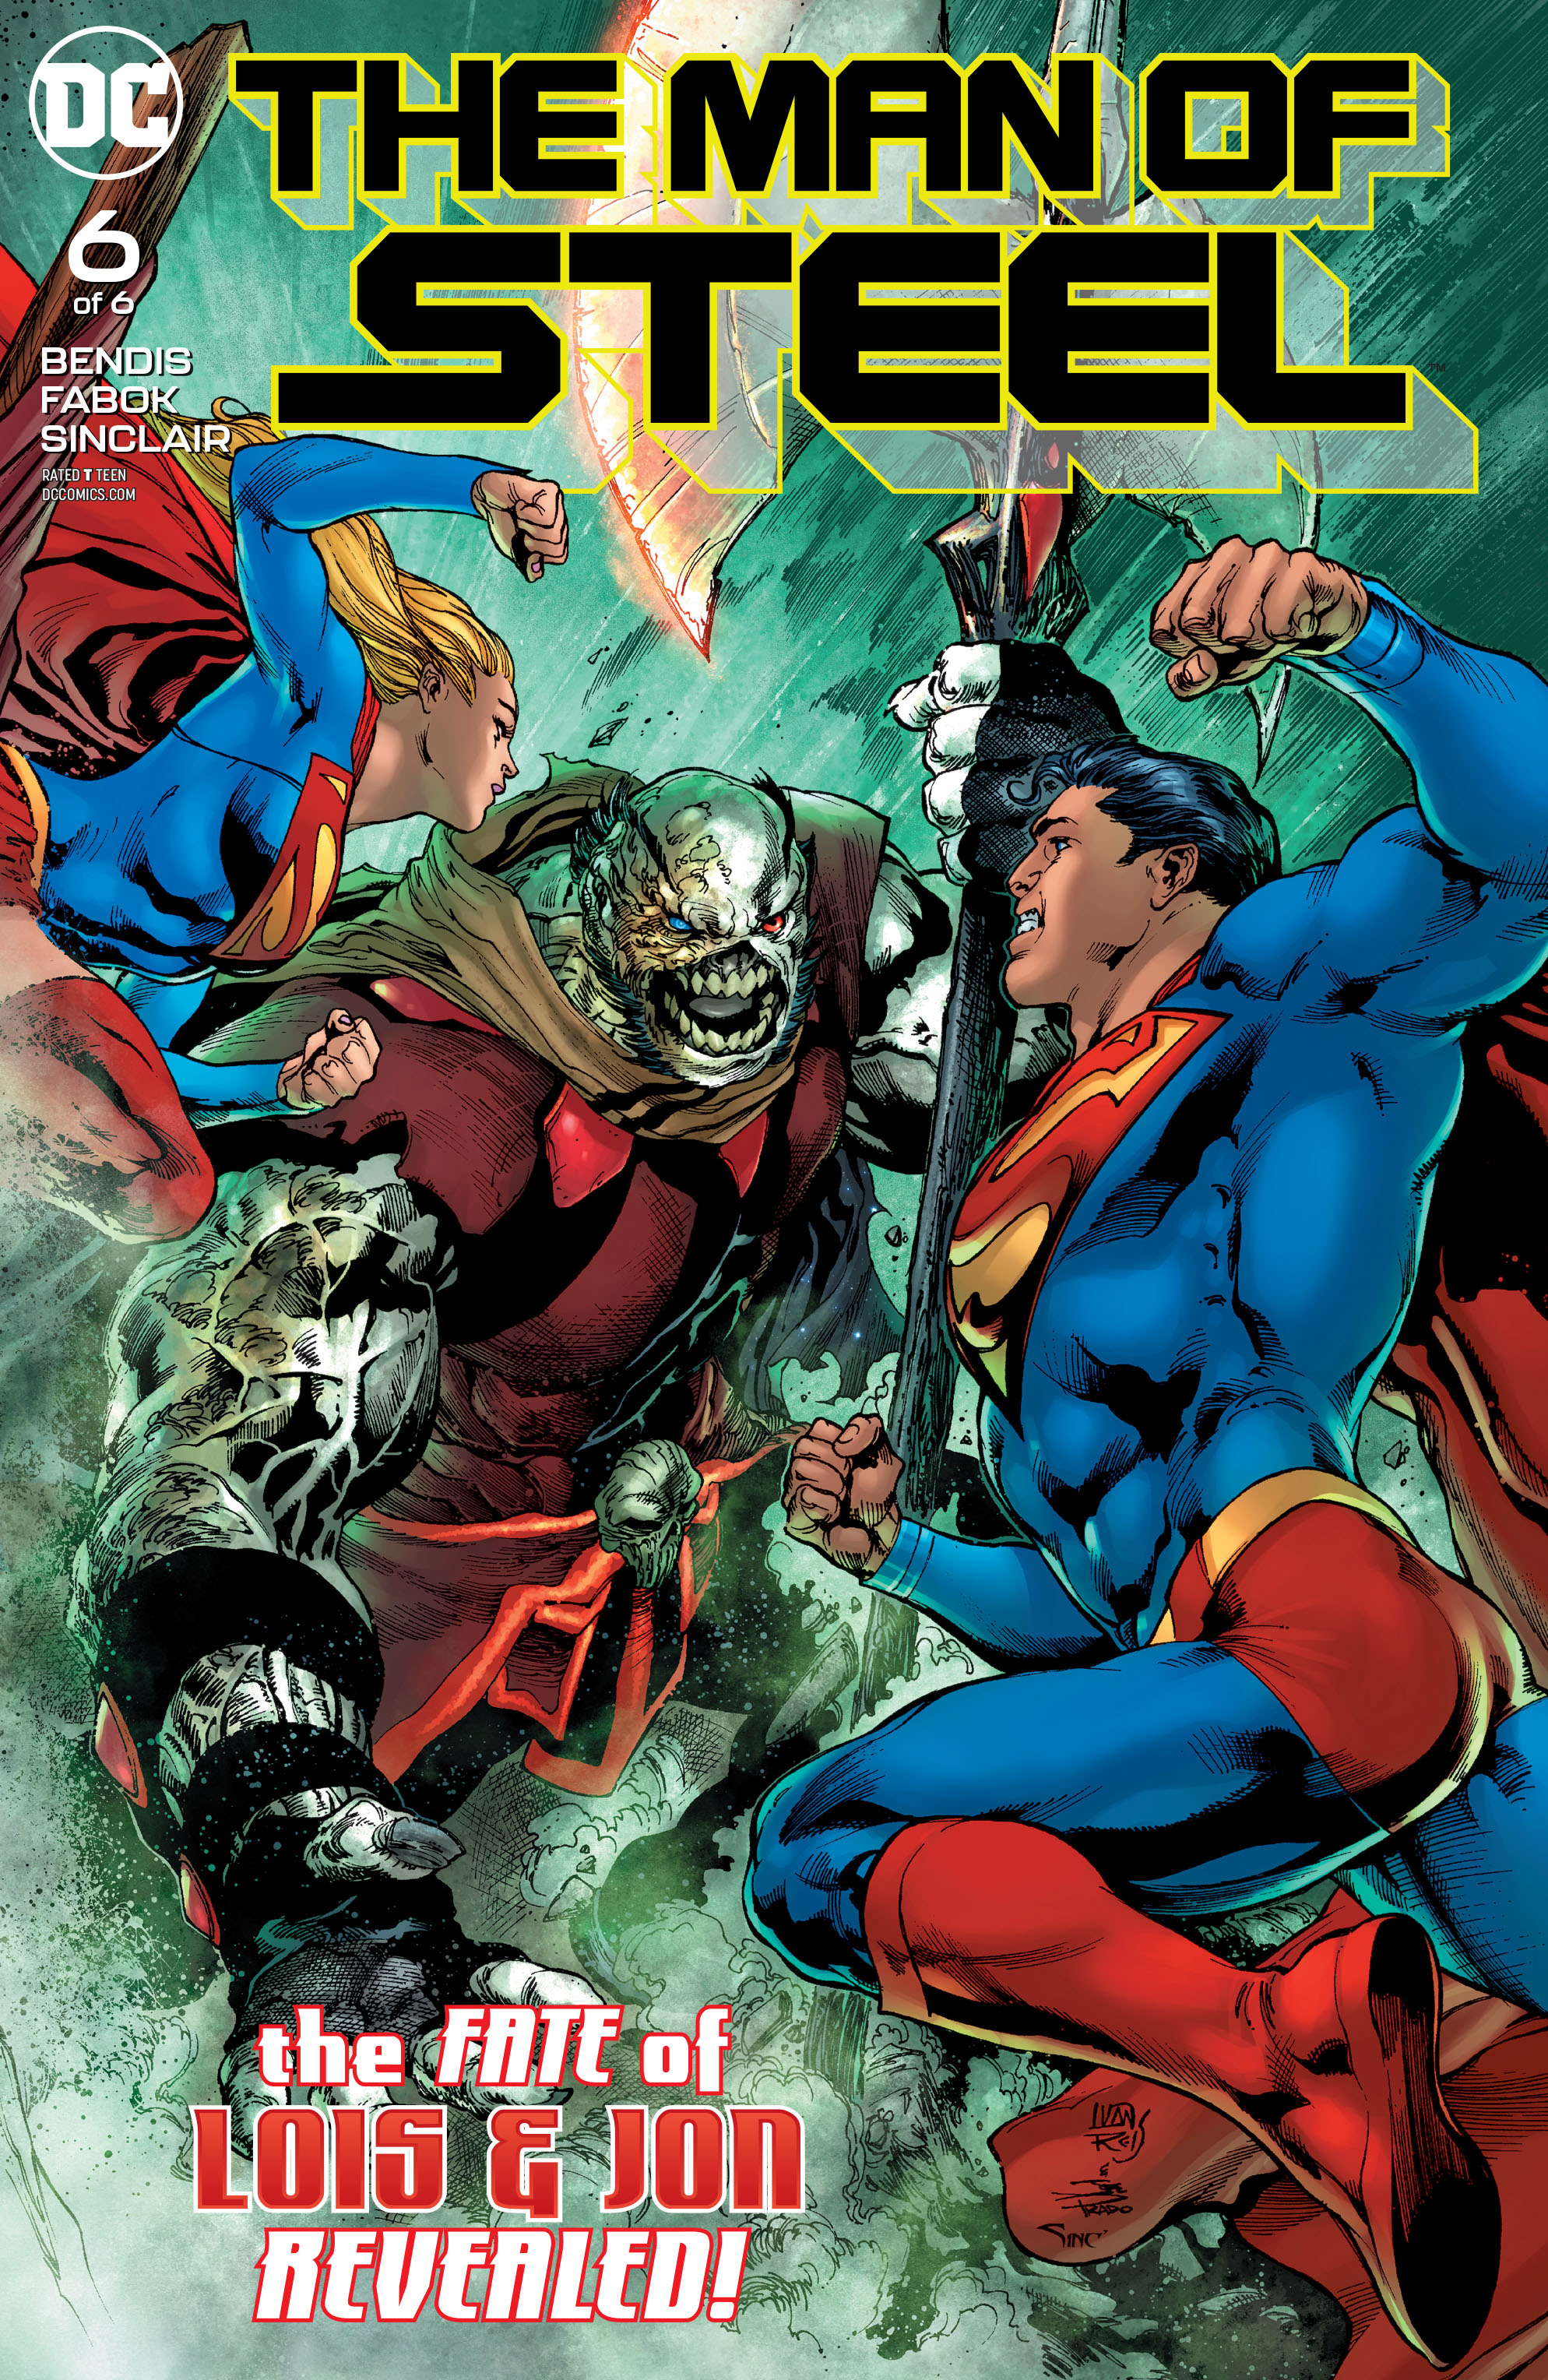 The Man of Steel #6